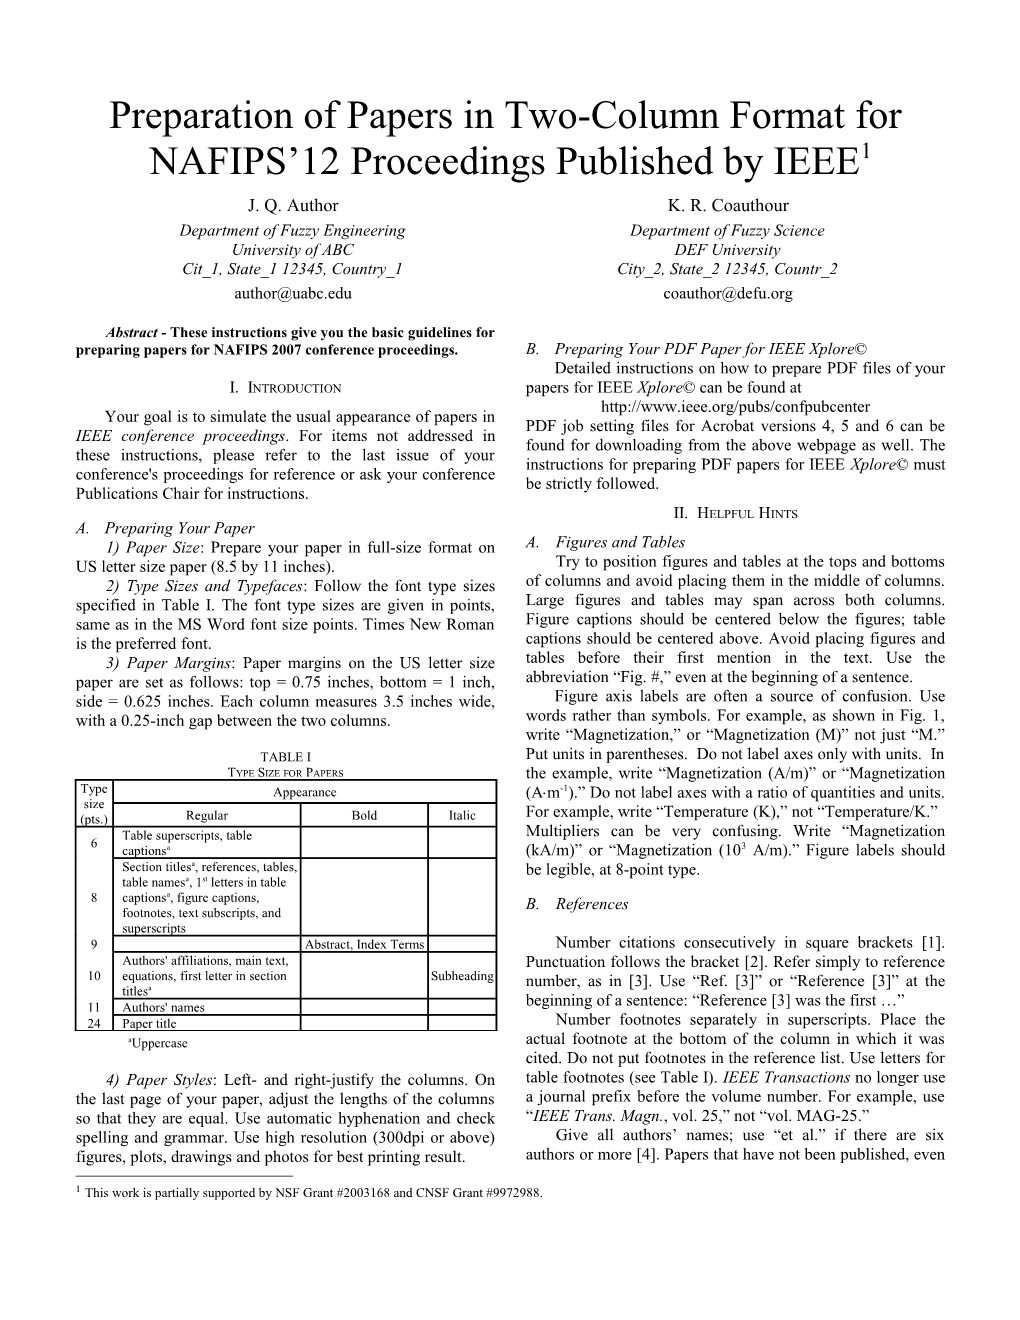 Preparation of Papers in a Two-Column Format for NAFIPS 04 Conference